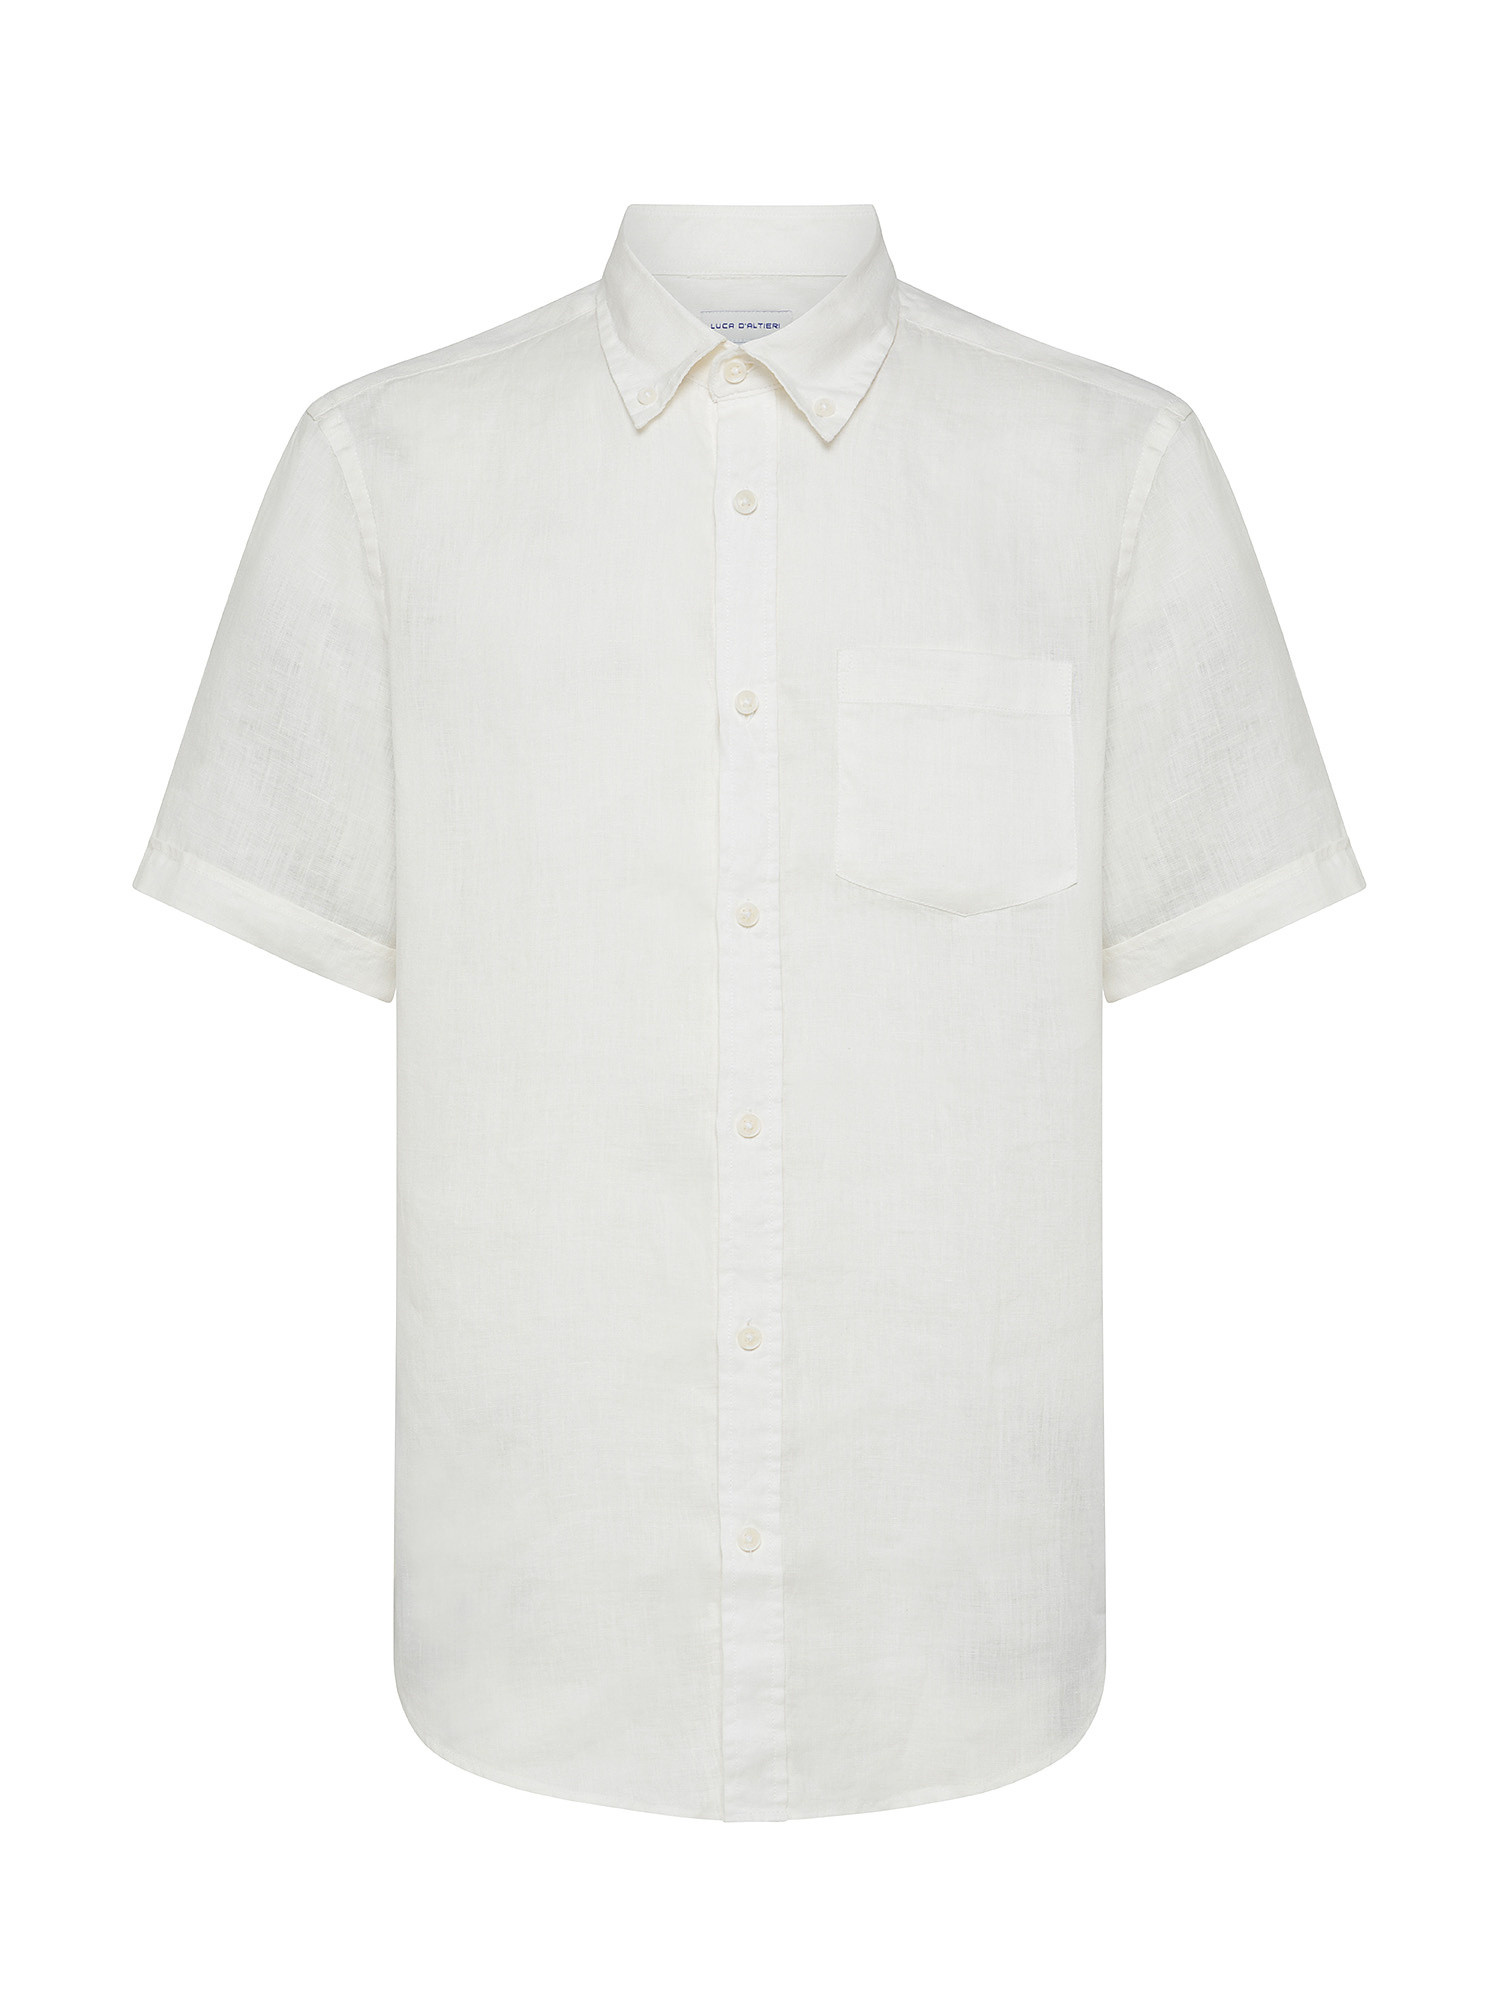 Luca D'Altieri - Regular fit shirt in pure linen, White, large image number 0